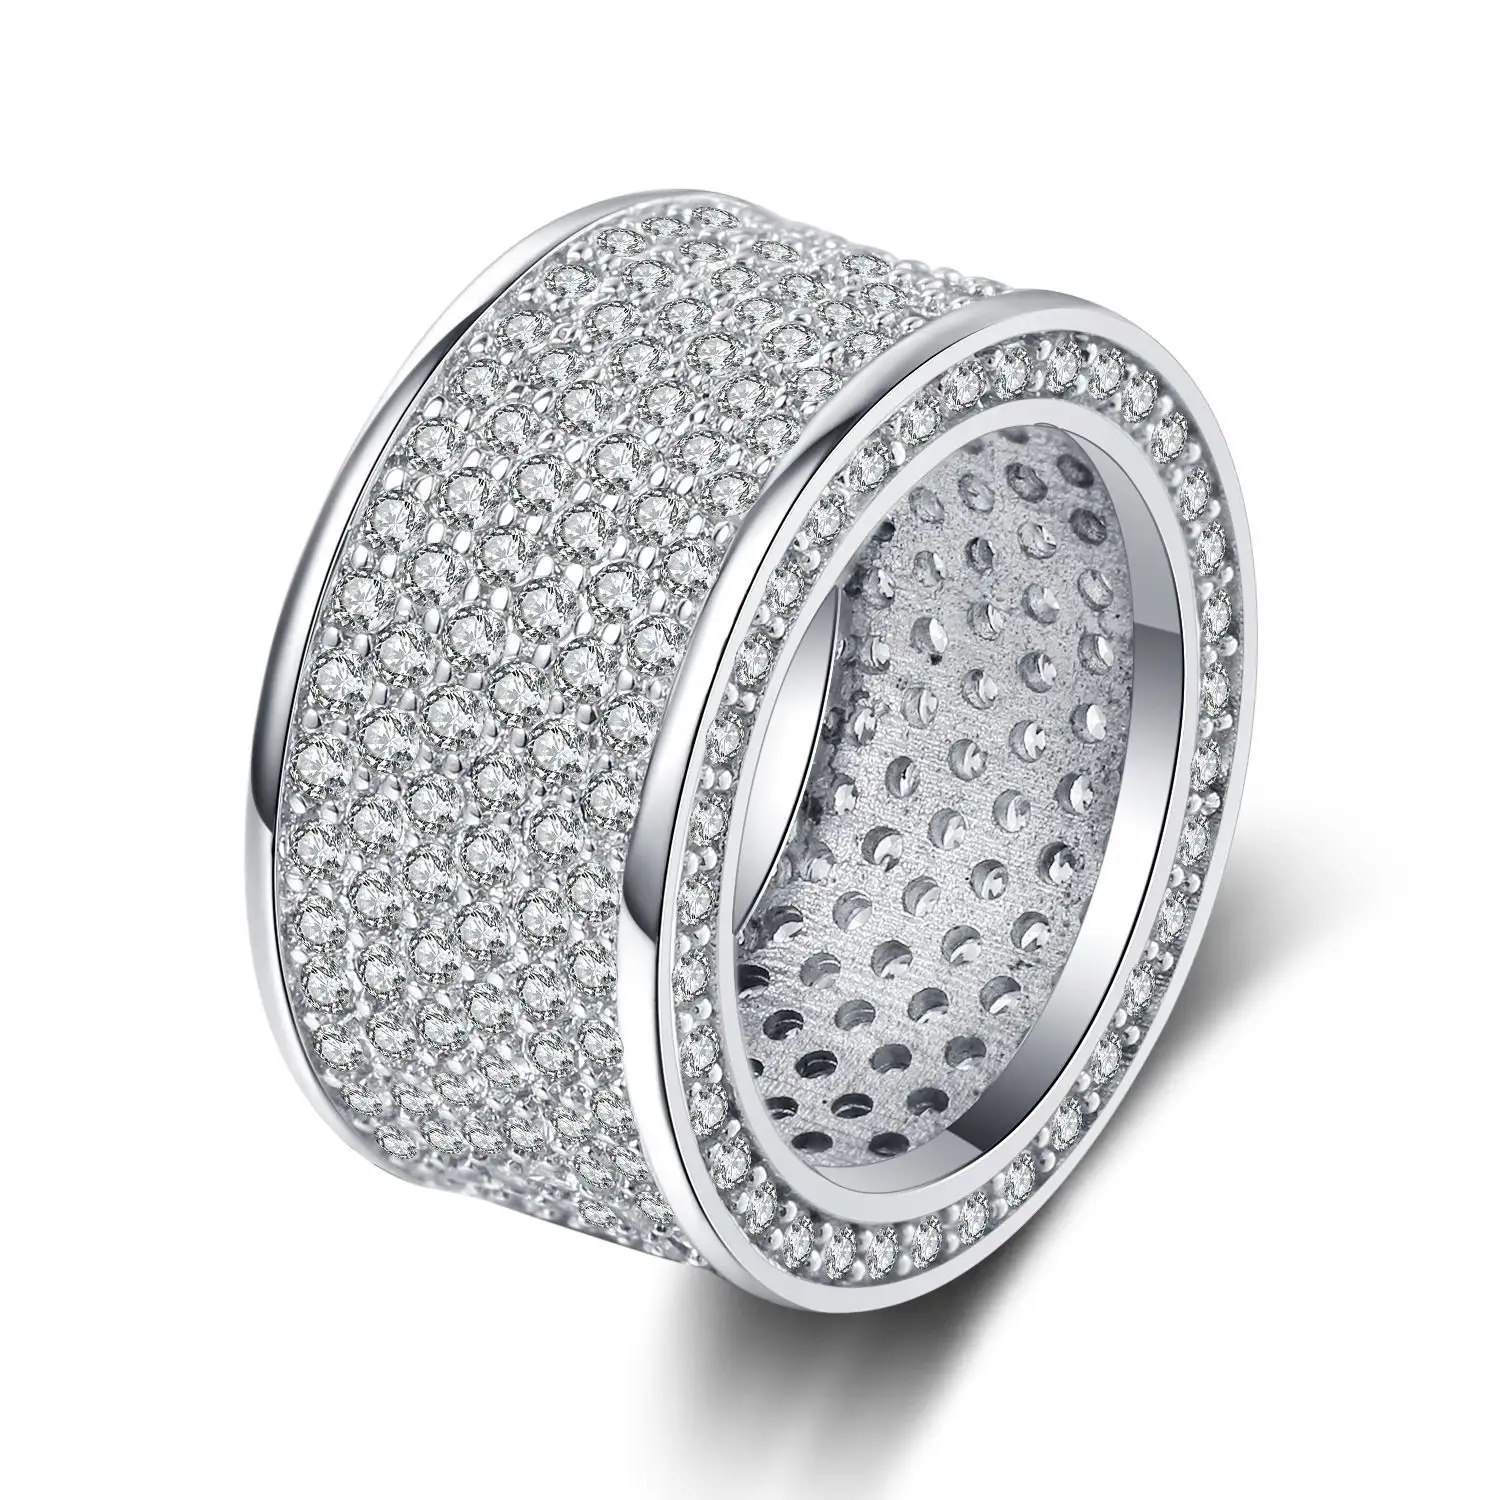 Hot selling luxury high-end electroplated platinum micro inlaid women full diamond ring